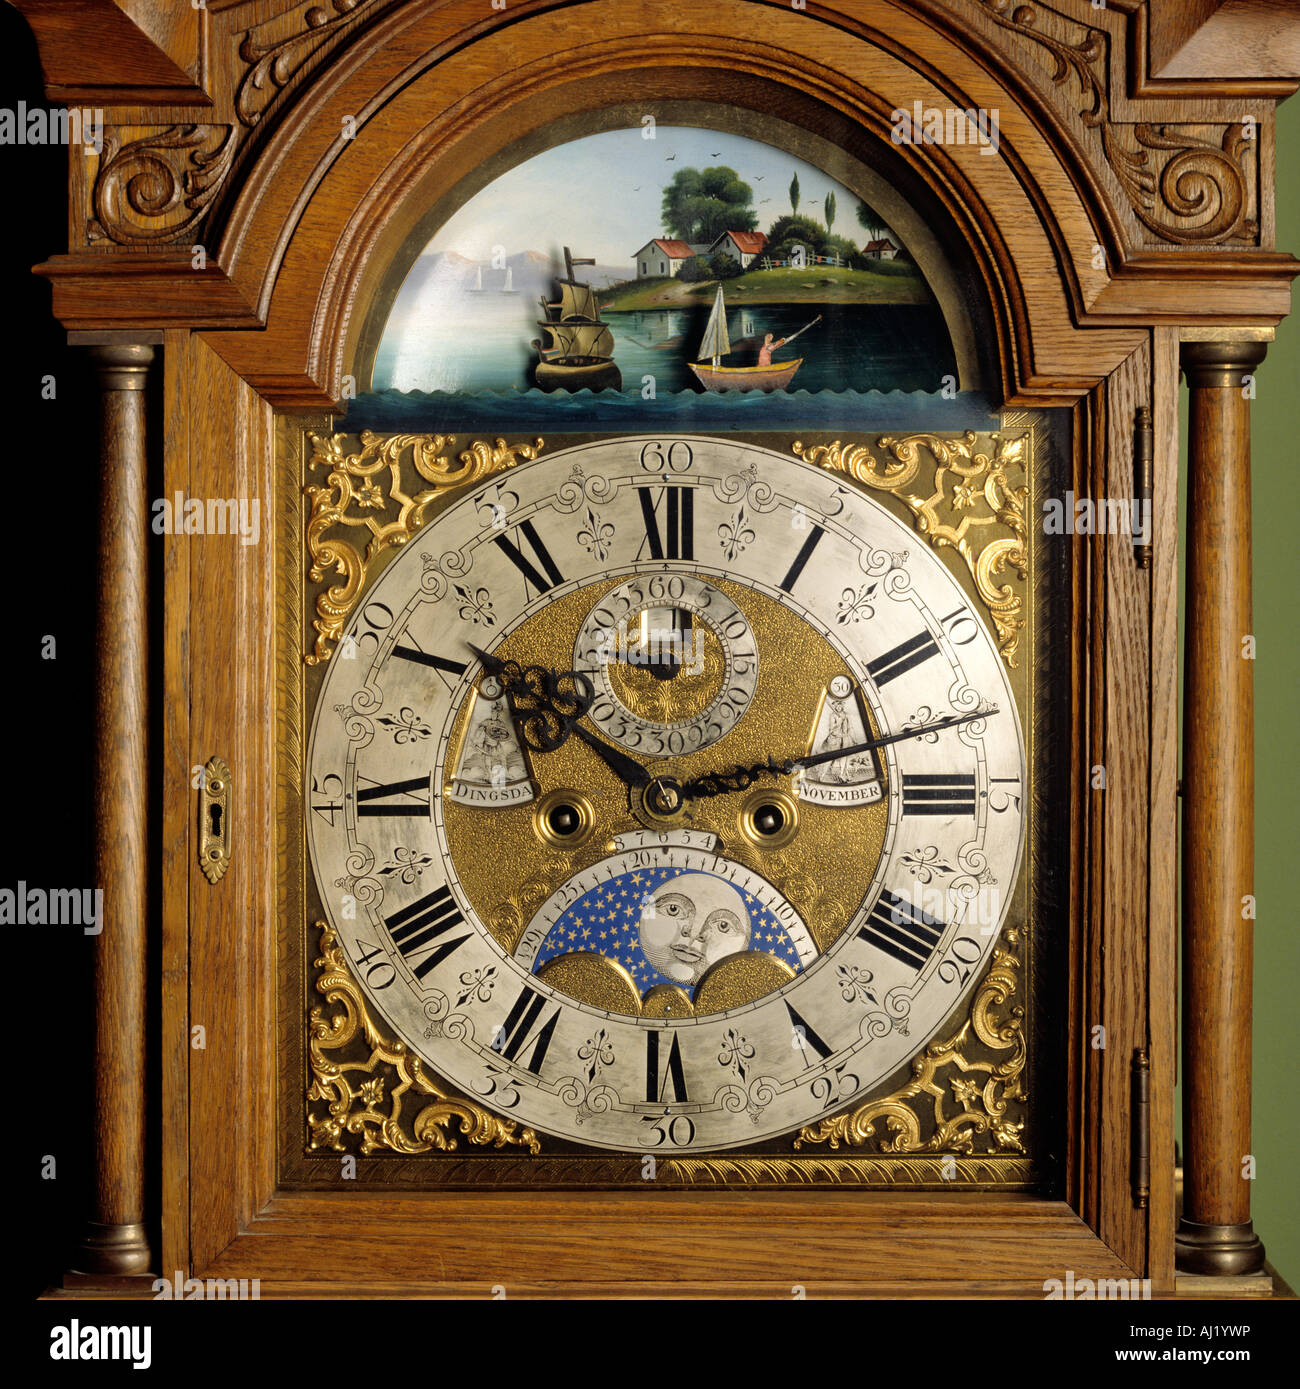 Wooden grandfather clock face with roman numerals, decorative images and moondial Stock Photo